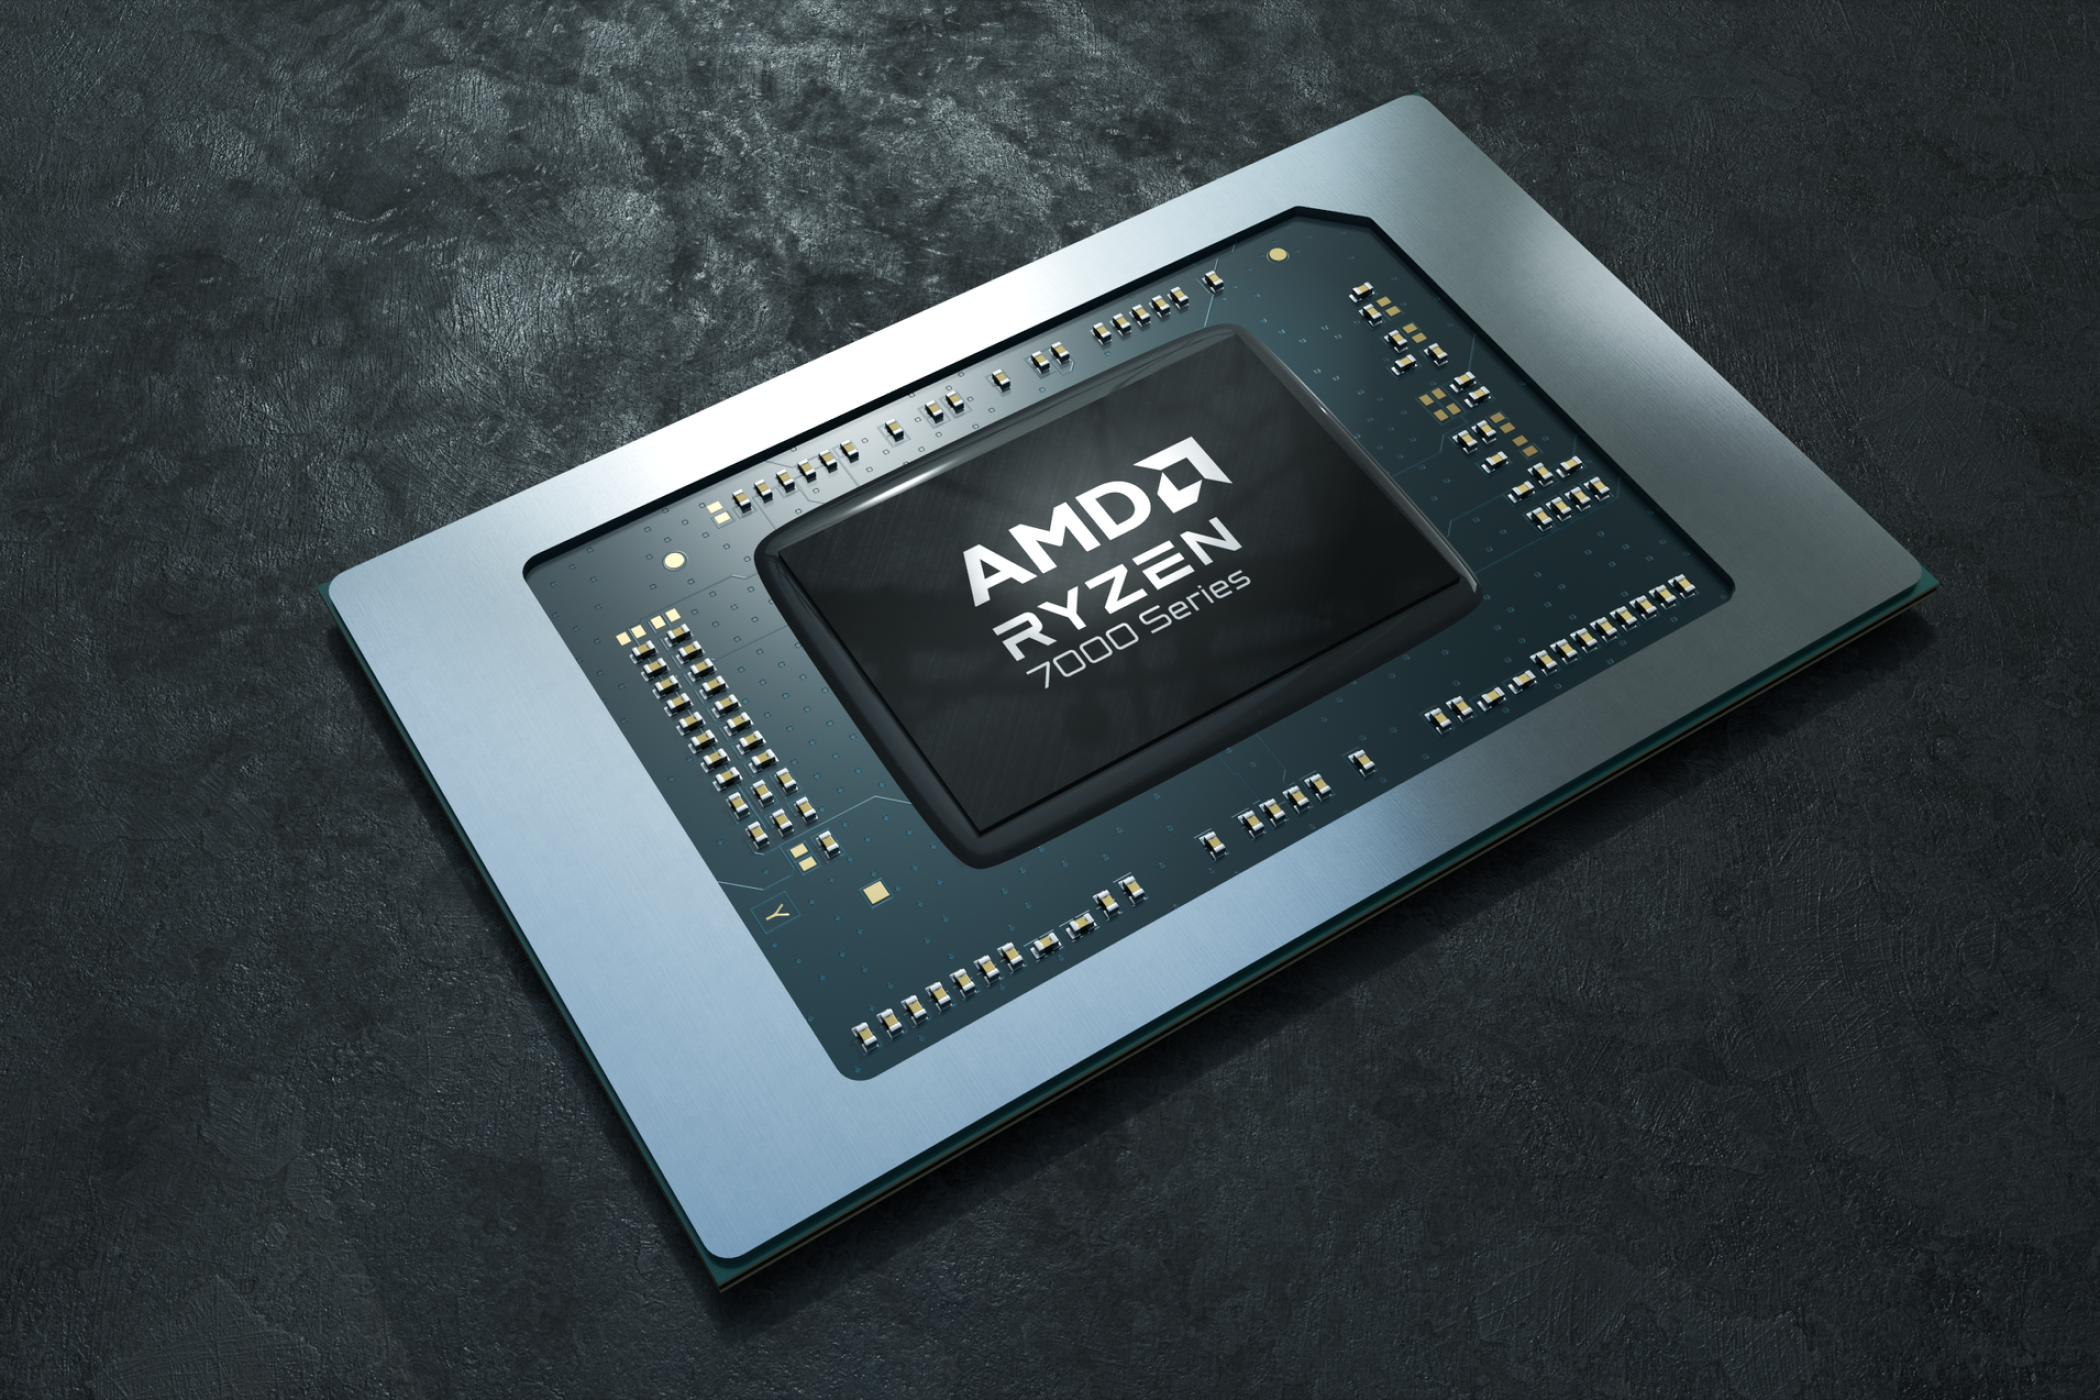 AMD reveals key details about its upcoming hybrid APUs